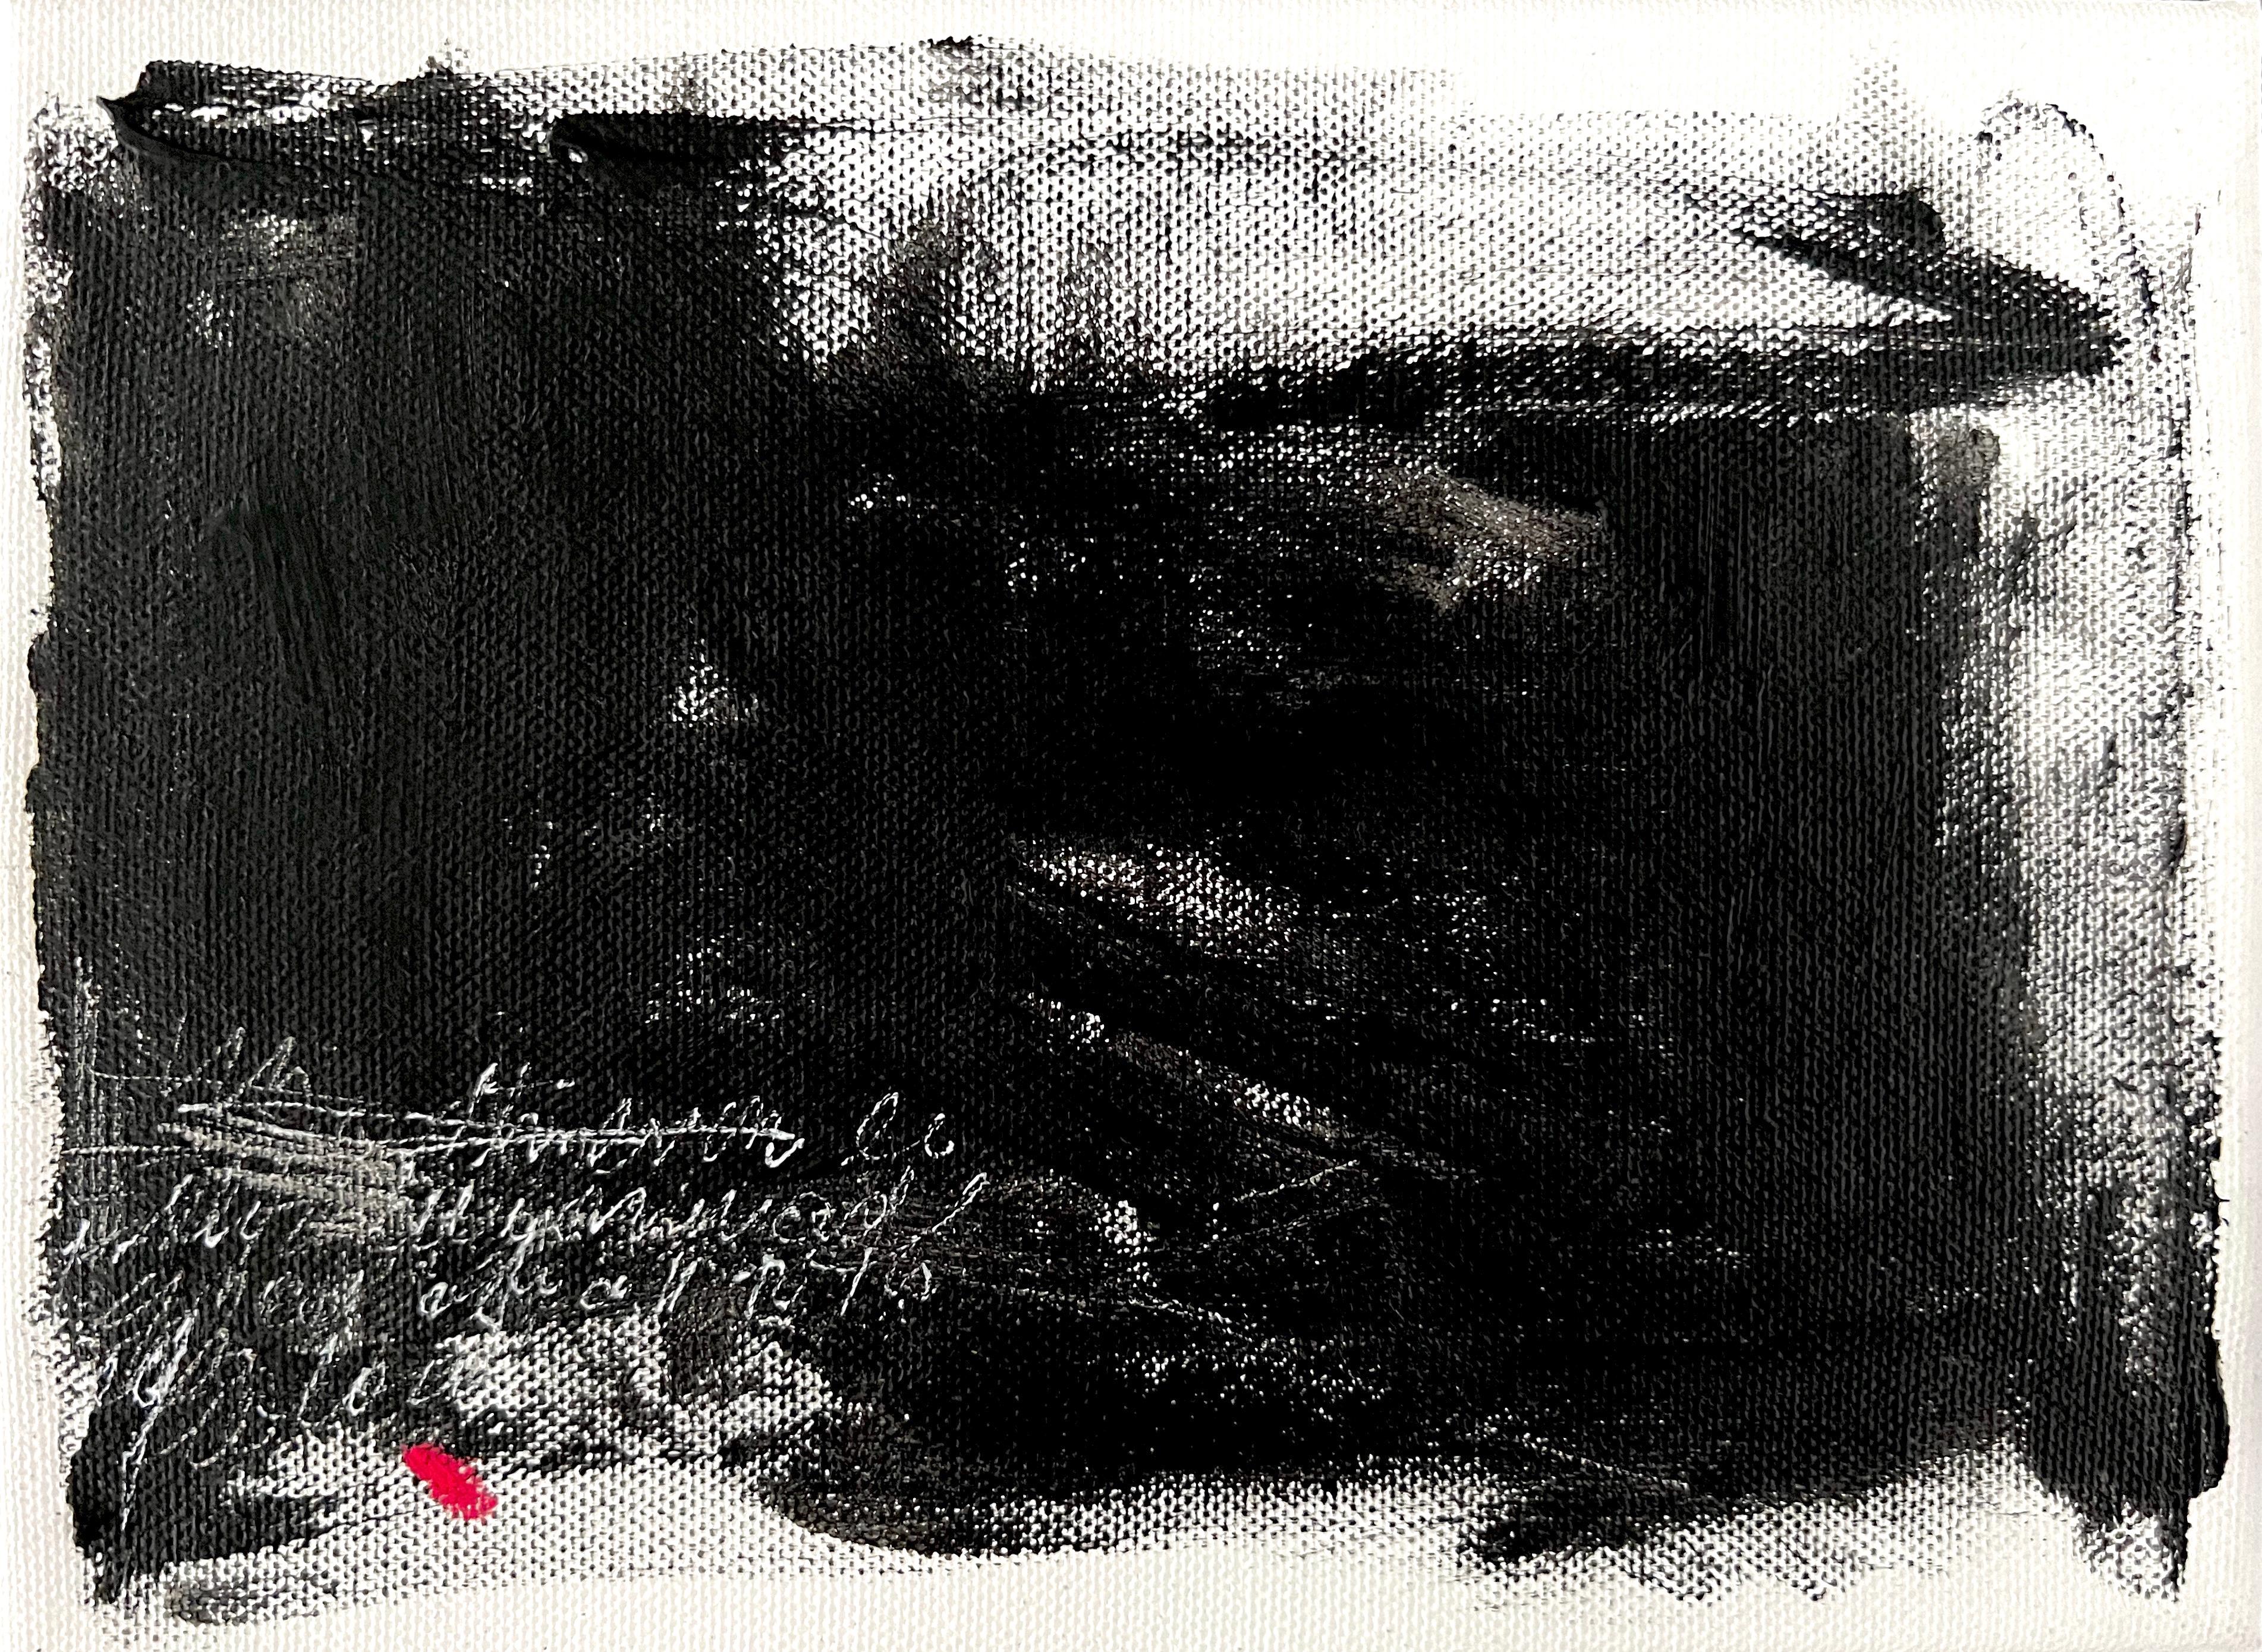 A Note To Myself - 2 (black and white abstract painting) - Contemporary Art by Andrea Stajan-Ferkul